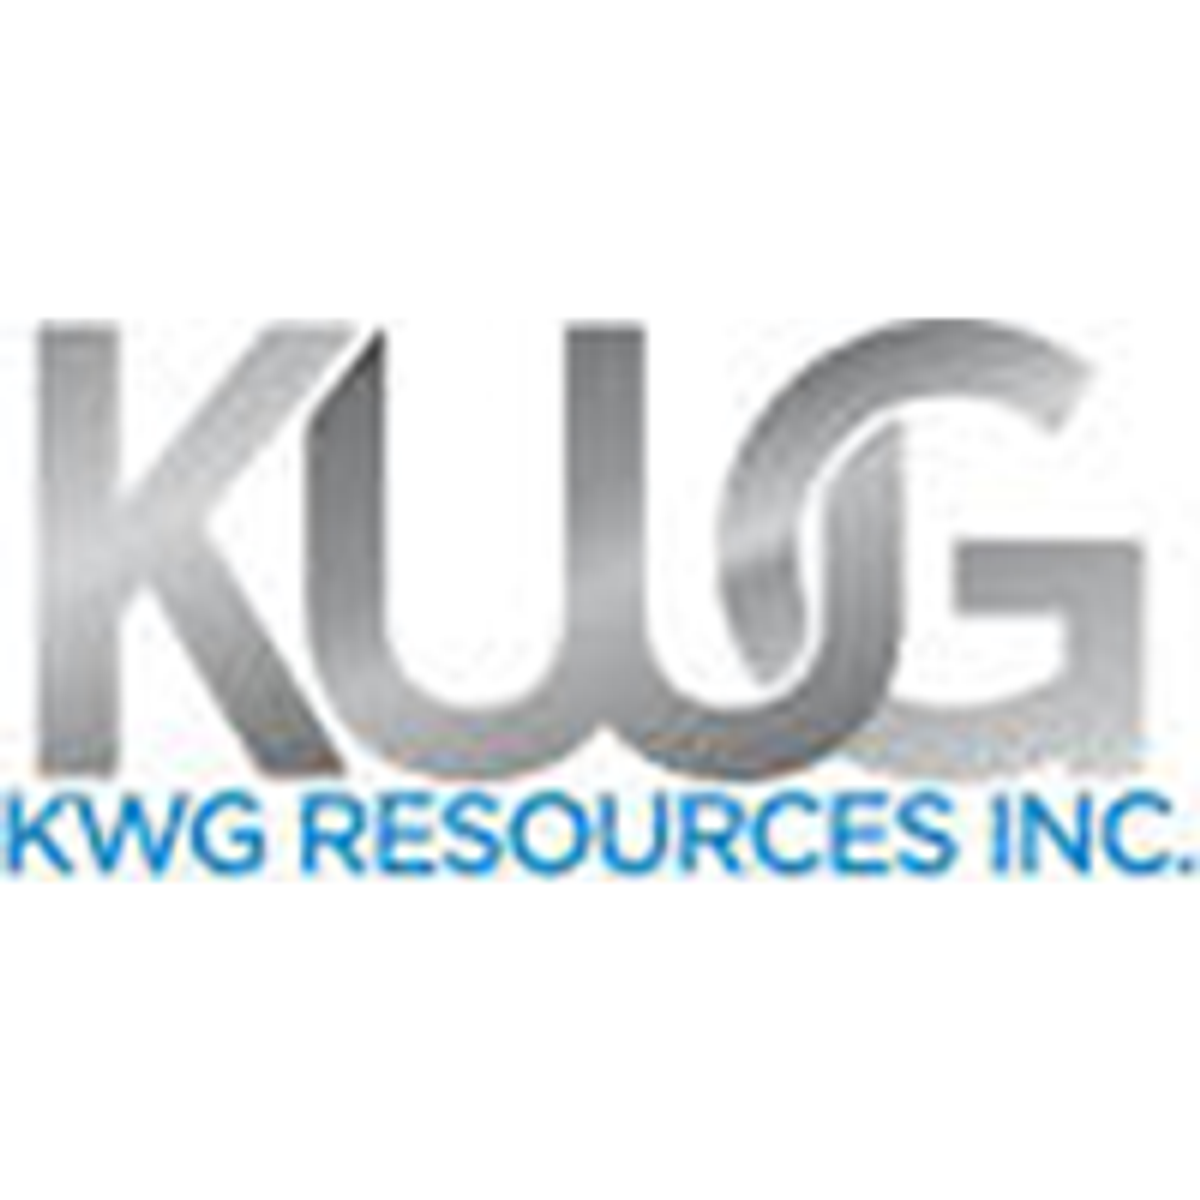 Fancamp and KWG Resources Announce Binding Agreement for the Sale of Fancamp's Beneficial Interests in Koper Lake-McFaulds Mining Claims to KWG